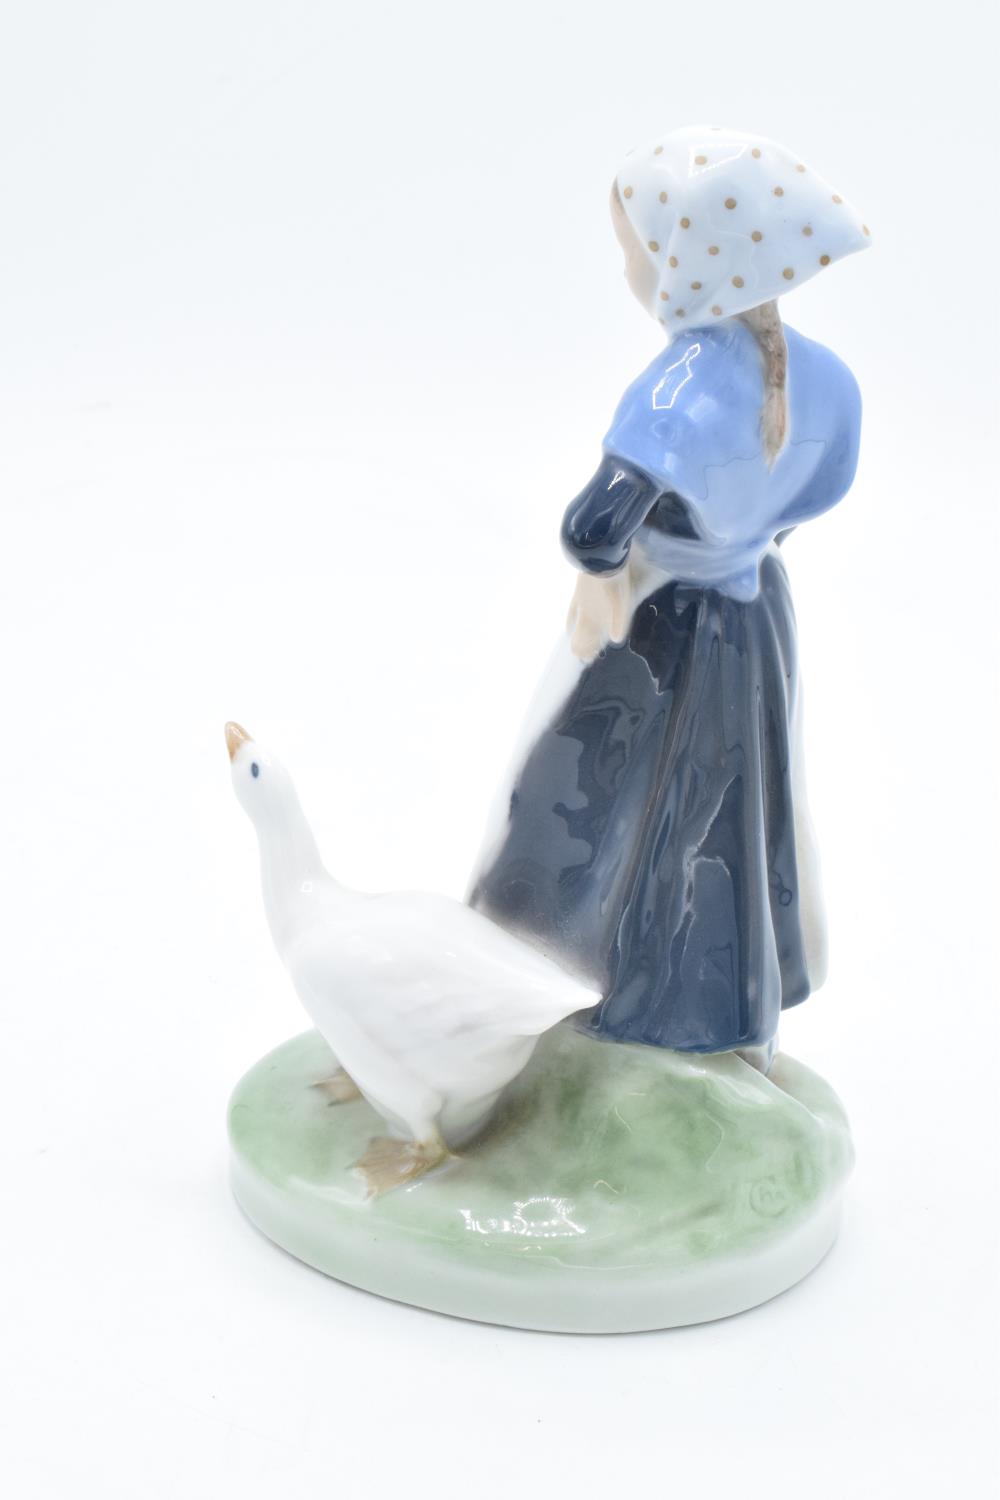 Royal Copenhagen figure Goose Girl 528. In good condition with no obvious damage or restoration. - Image 2 of 3